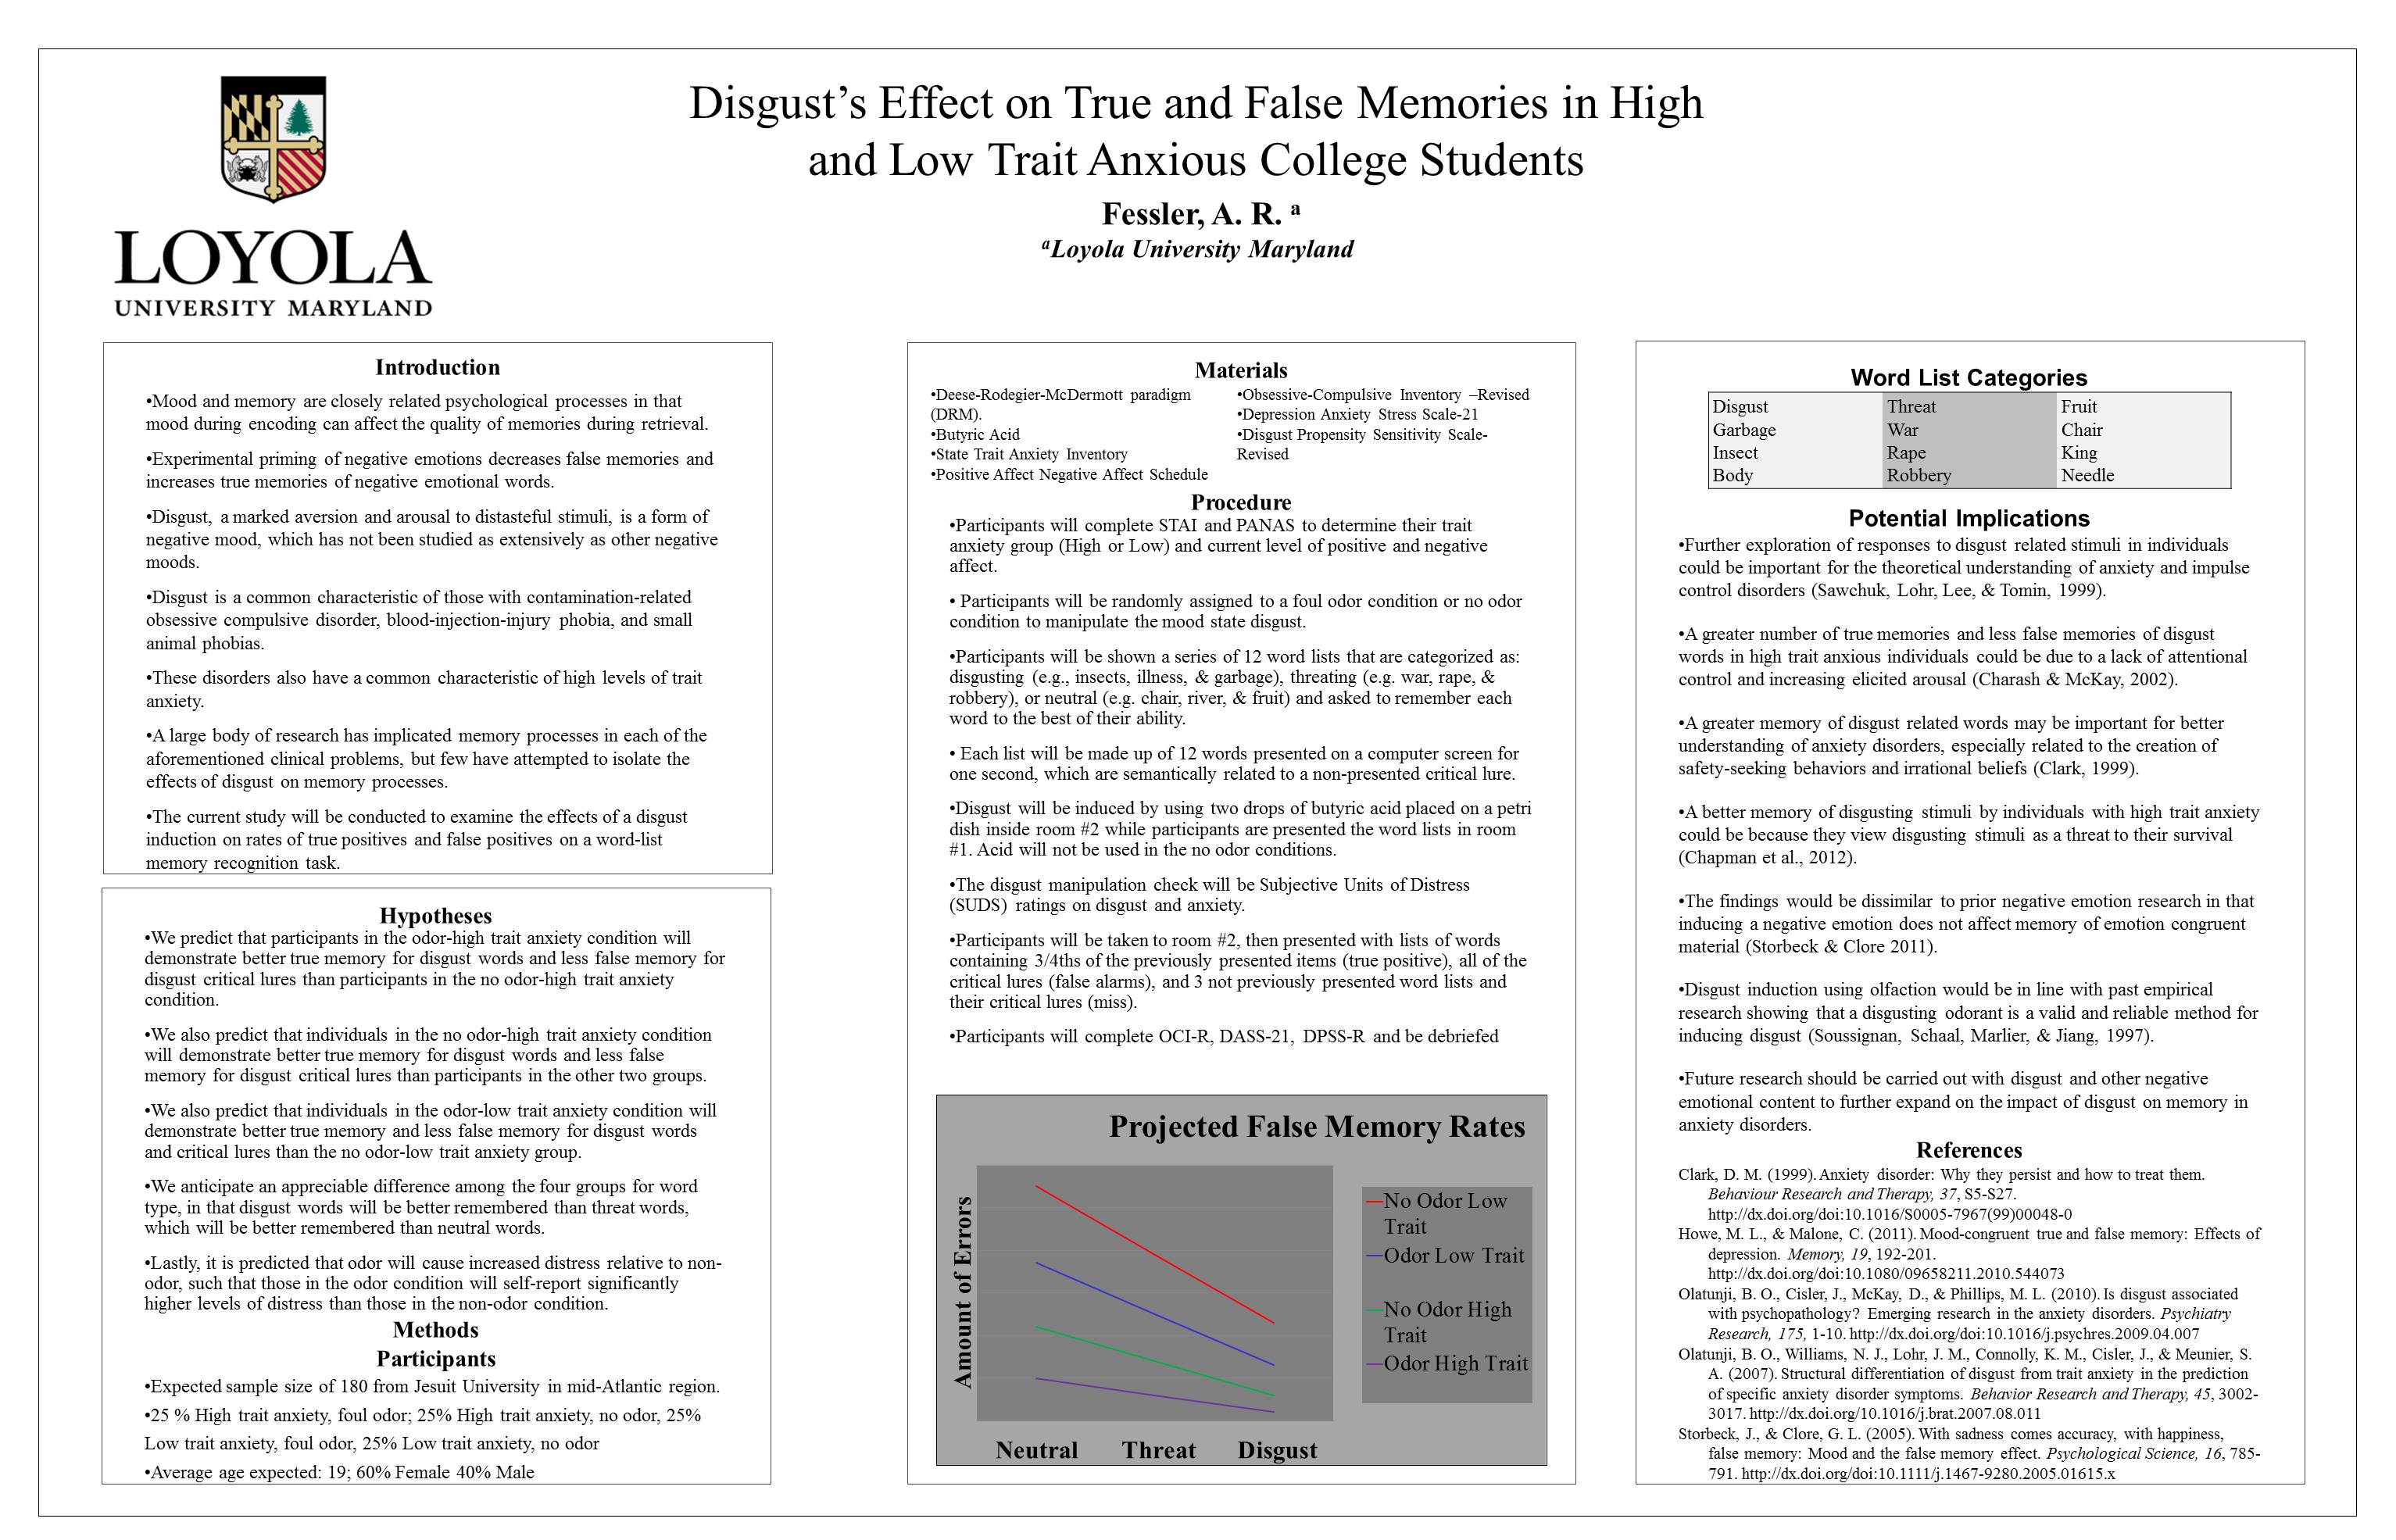 poster image: 'Disgust's Effect on True and False Memories in High and Low Trait Anxious College Students'